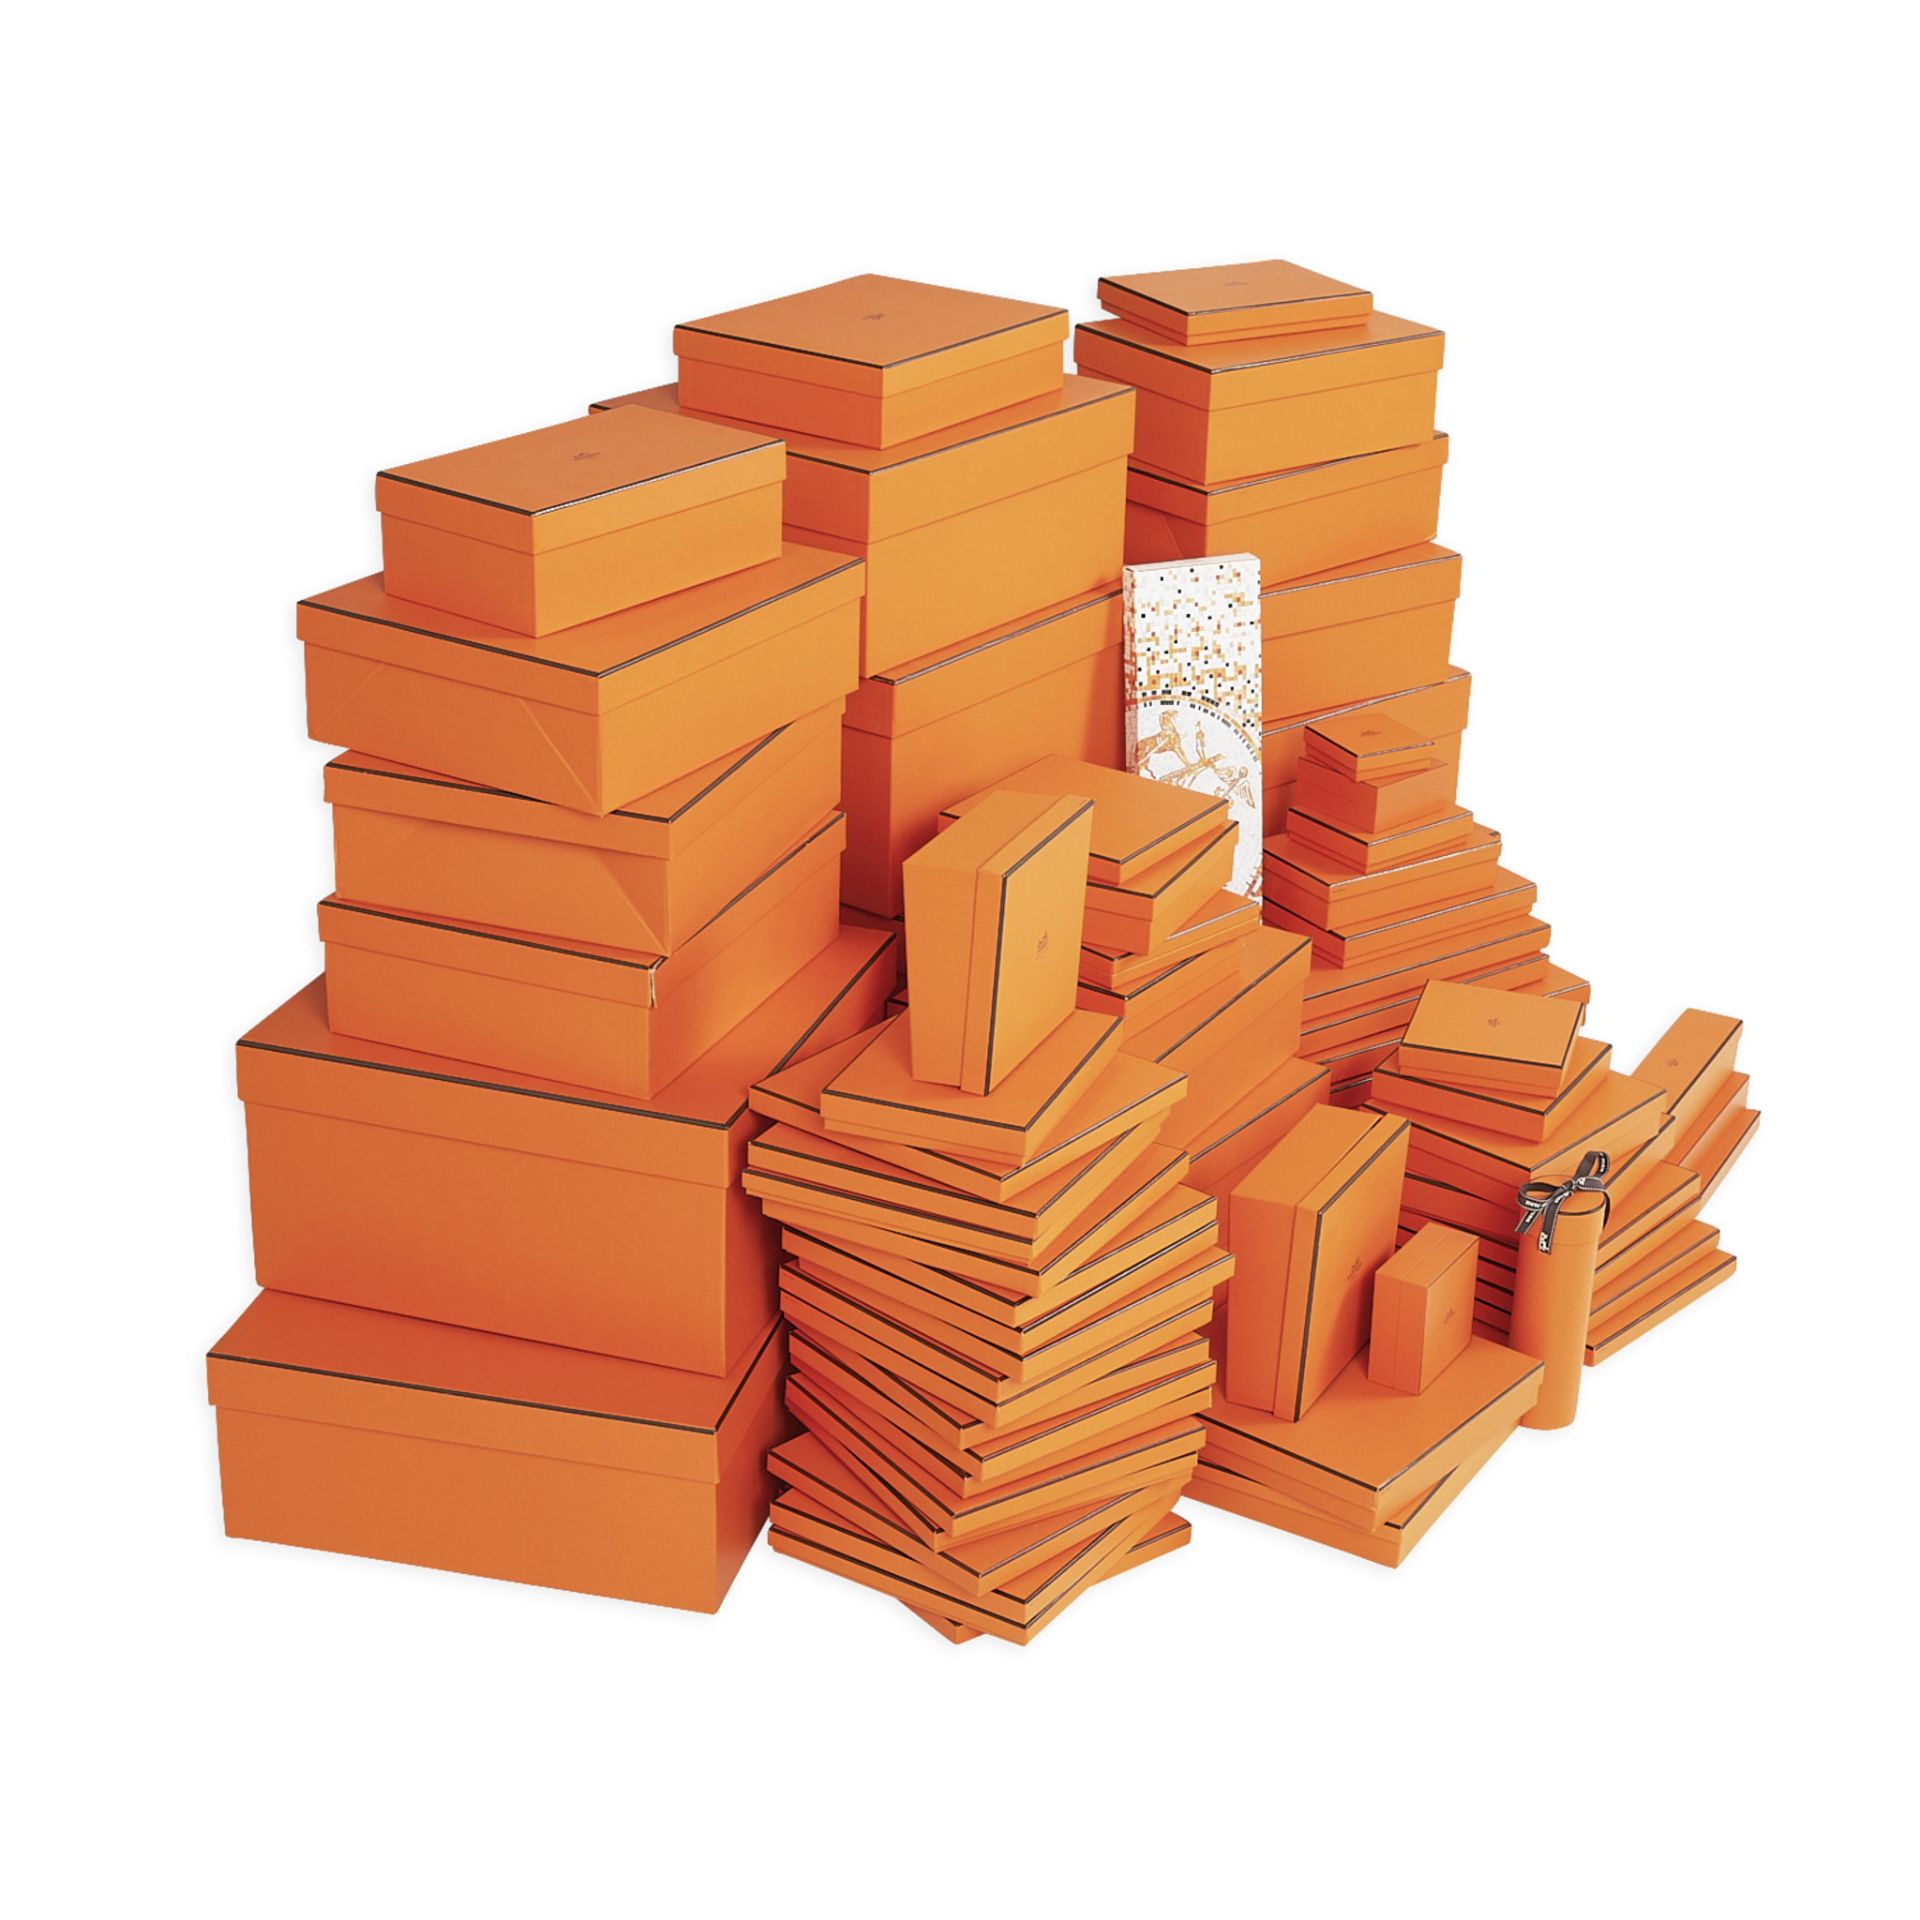 Large Group of 75 Hermes Boxes - Image 6 of 11